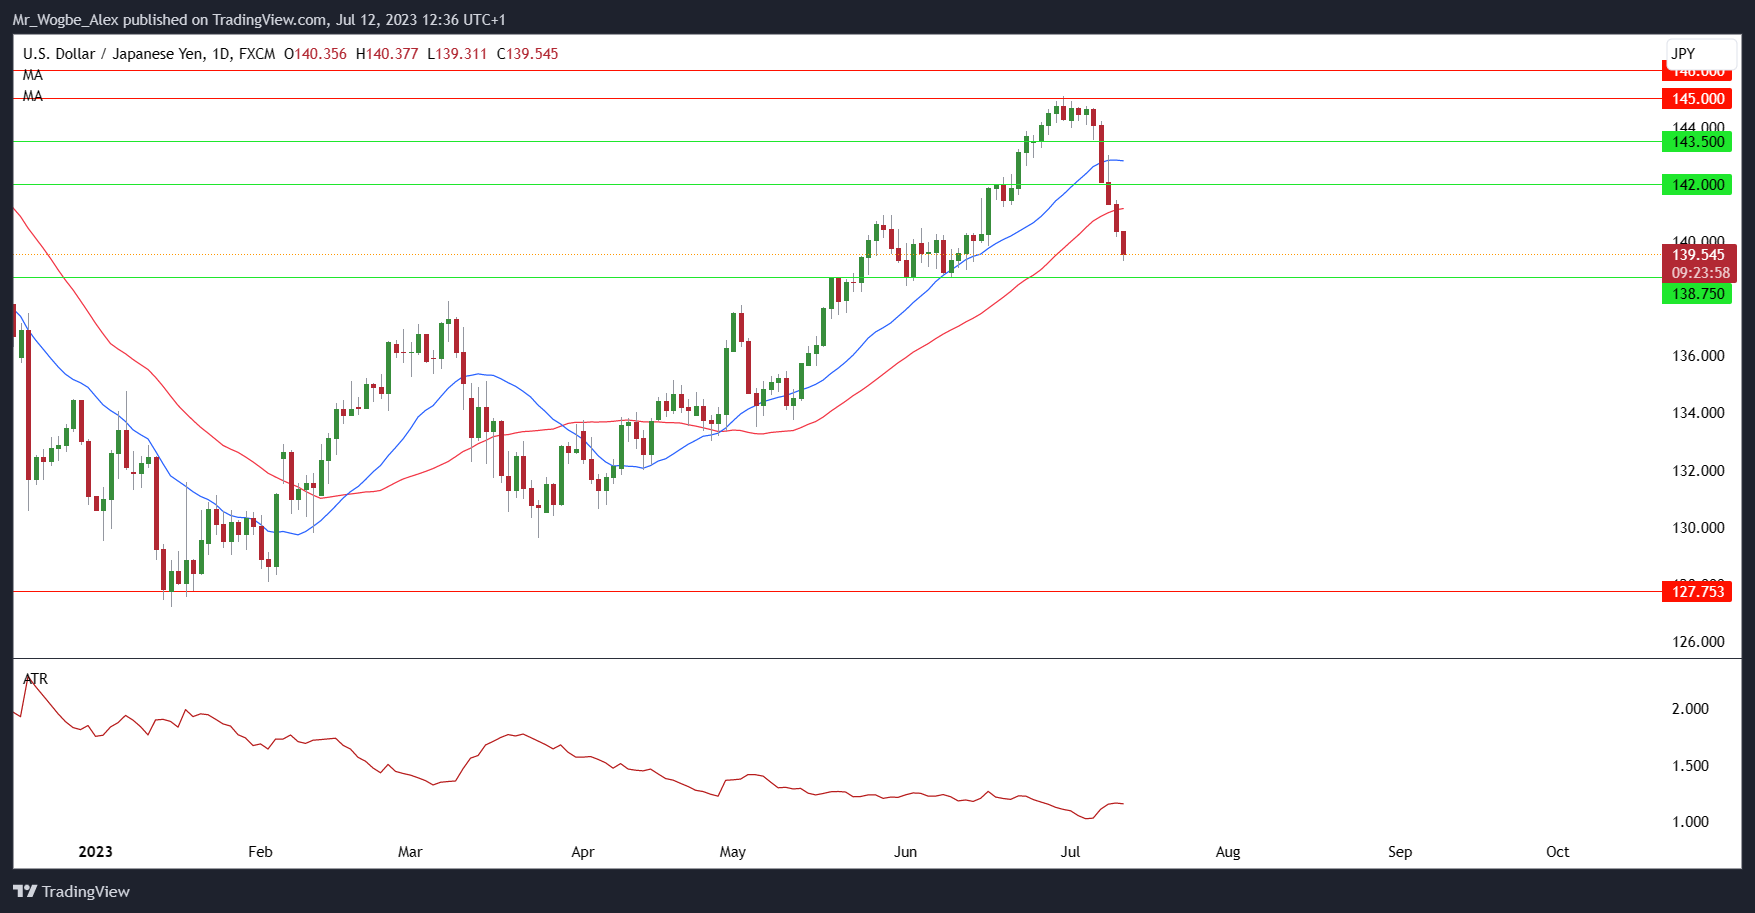 USD/JPY daily chart from TradingView